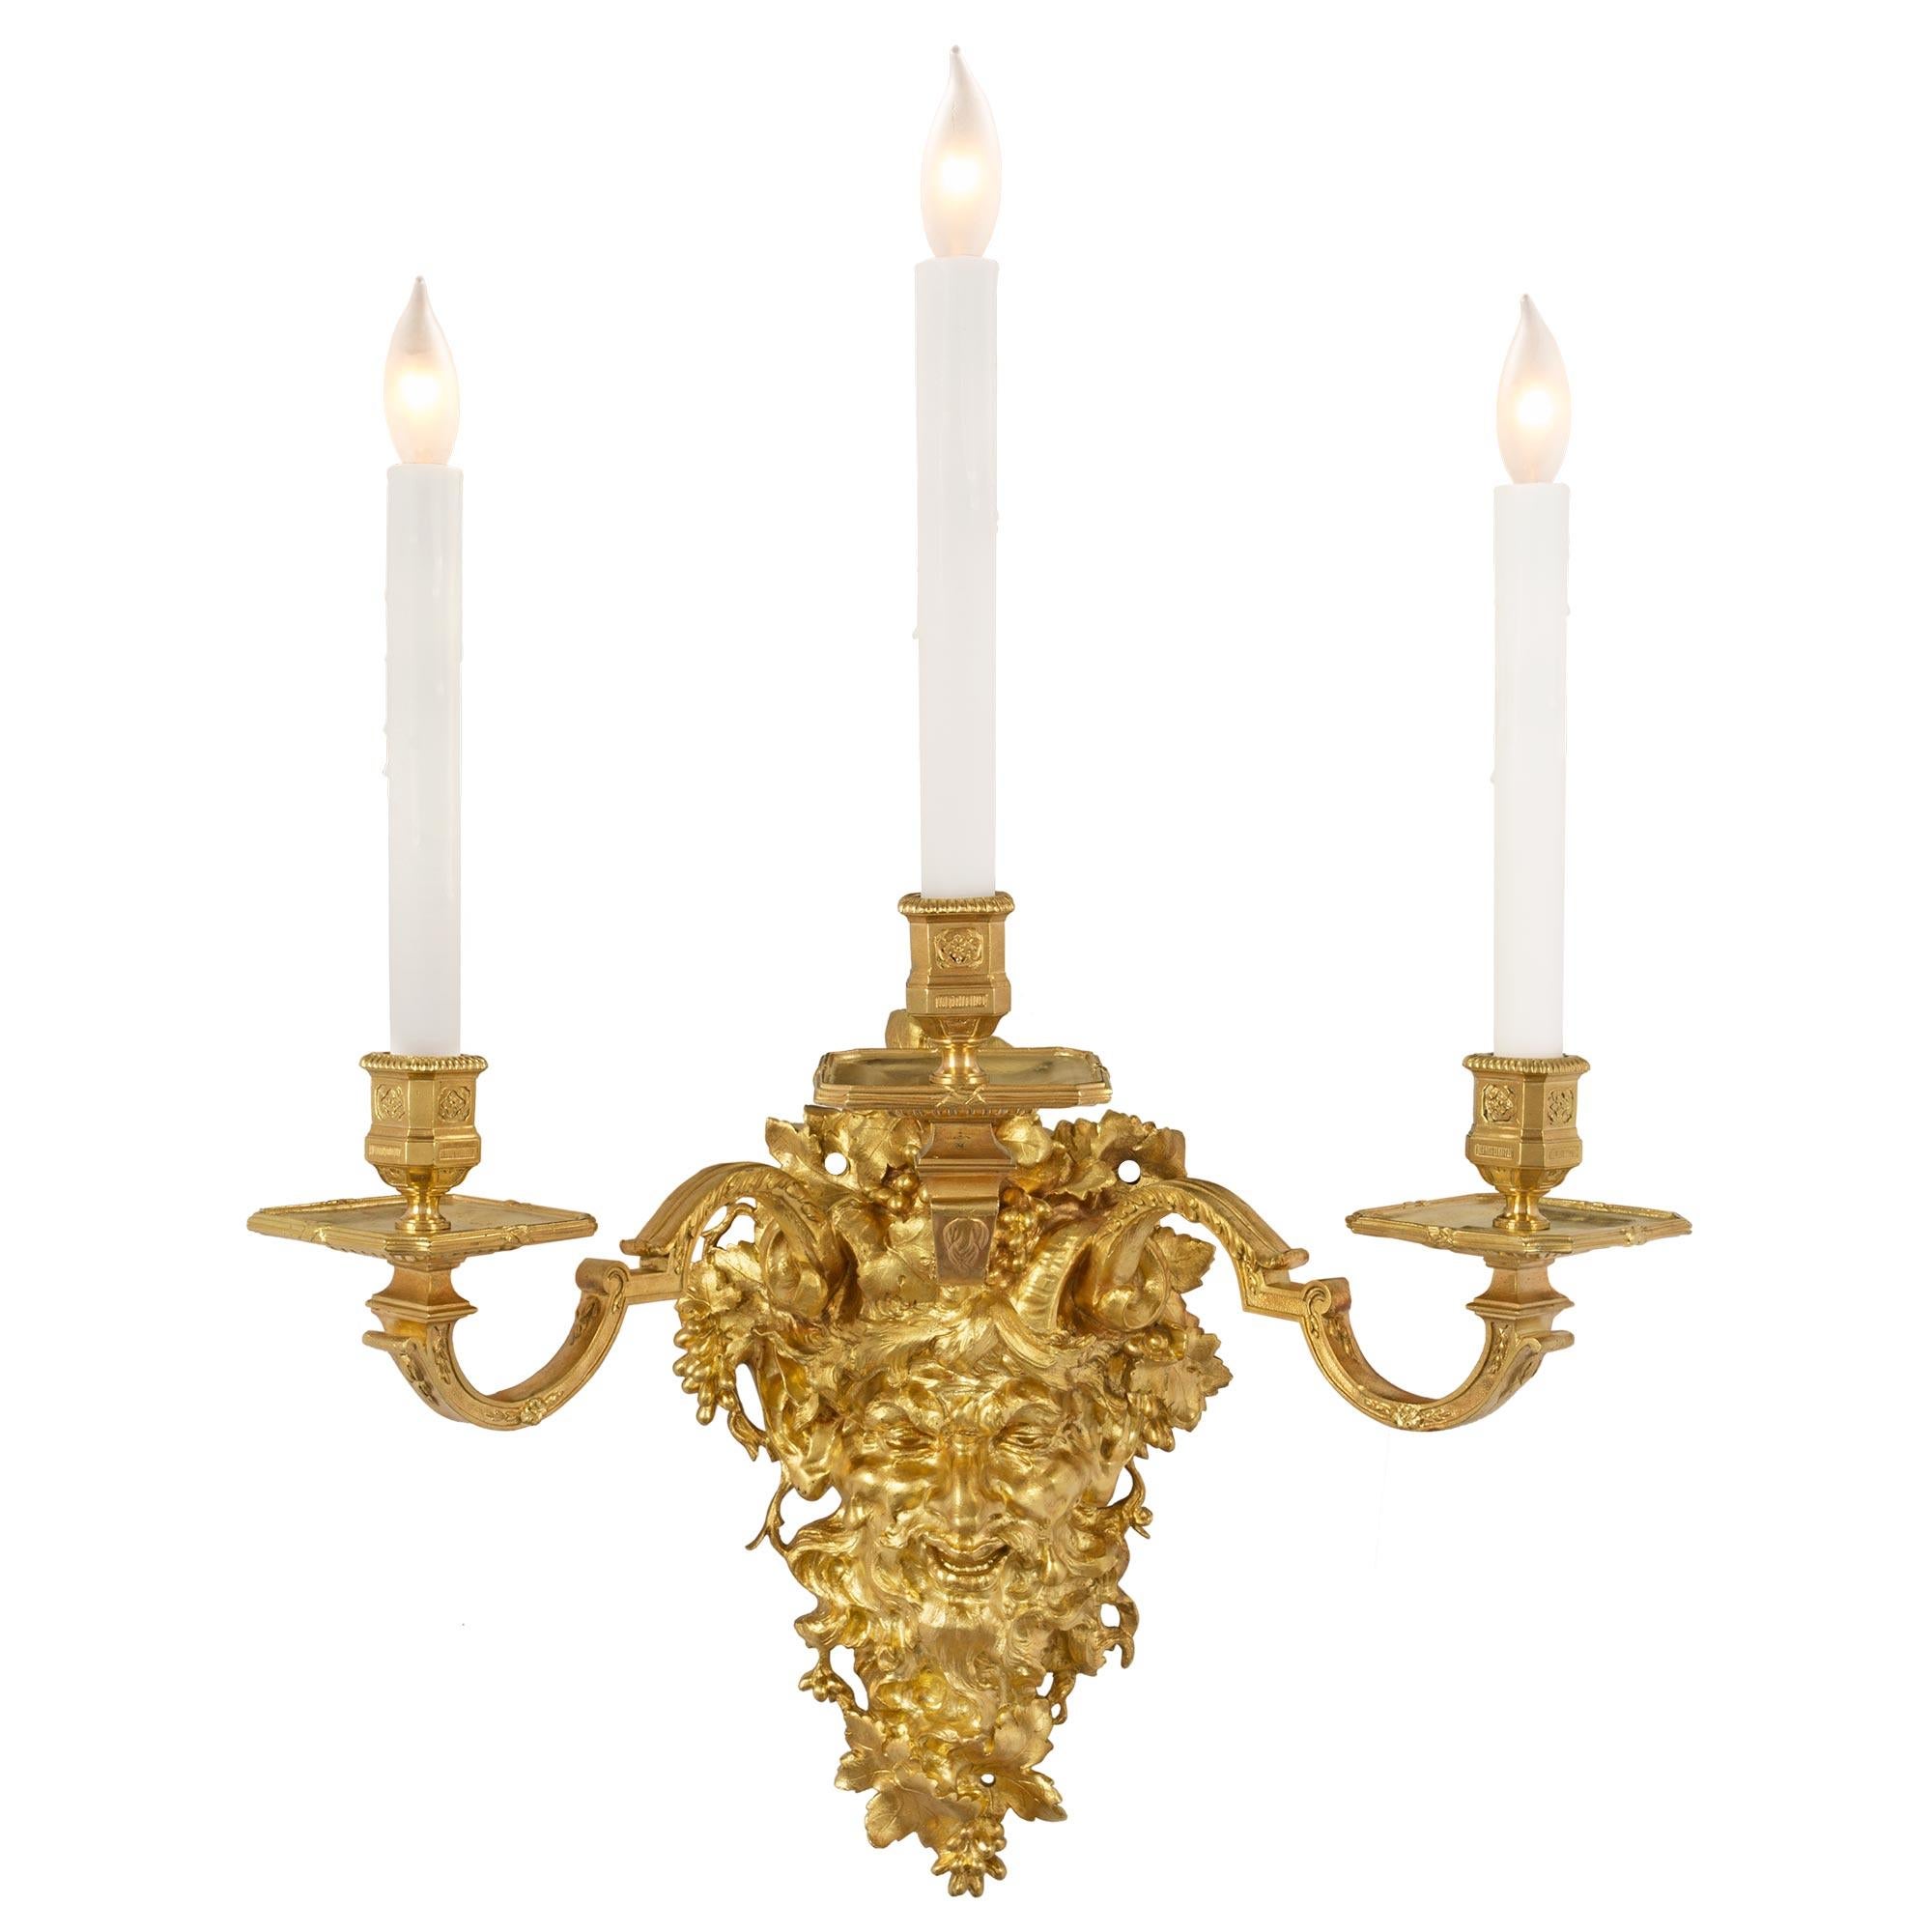 A spectacular and most impressive large scale pair of French 19th century Louis XIV st. ormolu three-arm sconces. The fanciful and expressive back plate is of a grinning satyr. The satyr is surrounded by richly detailed grape clusters and vines. The